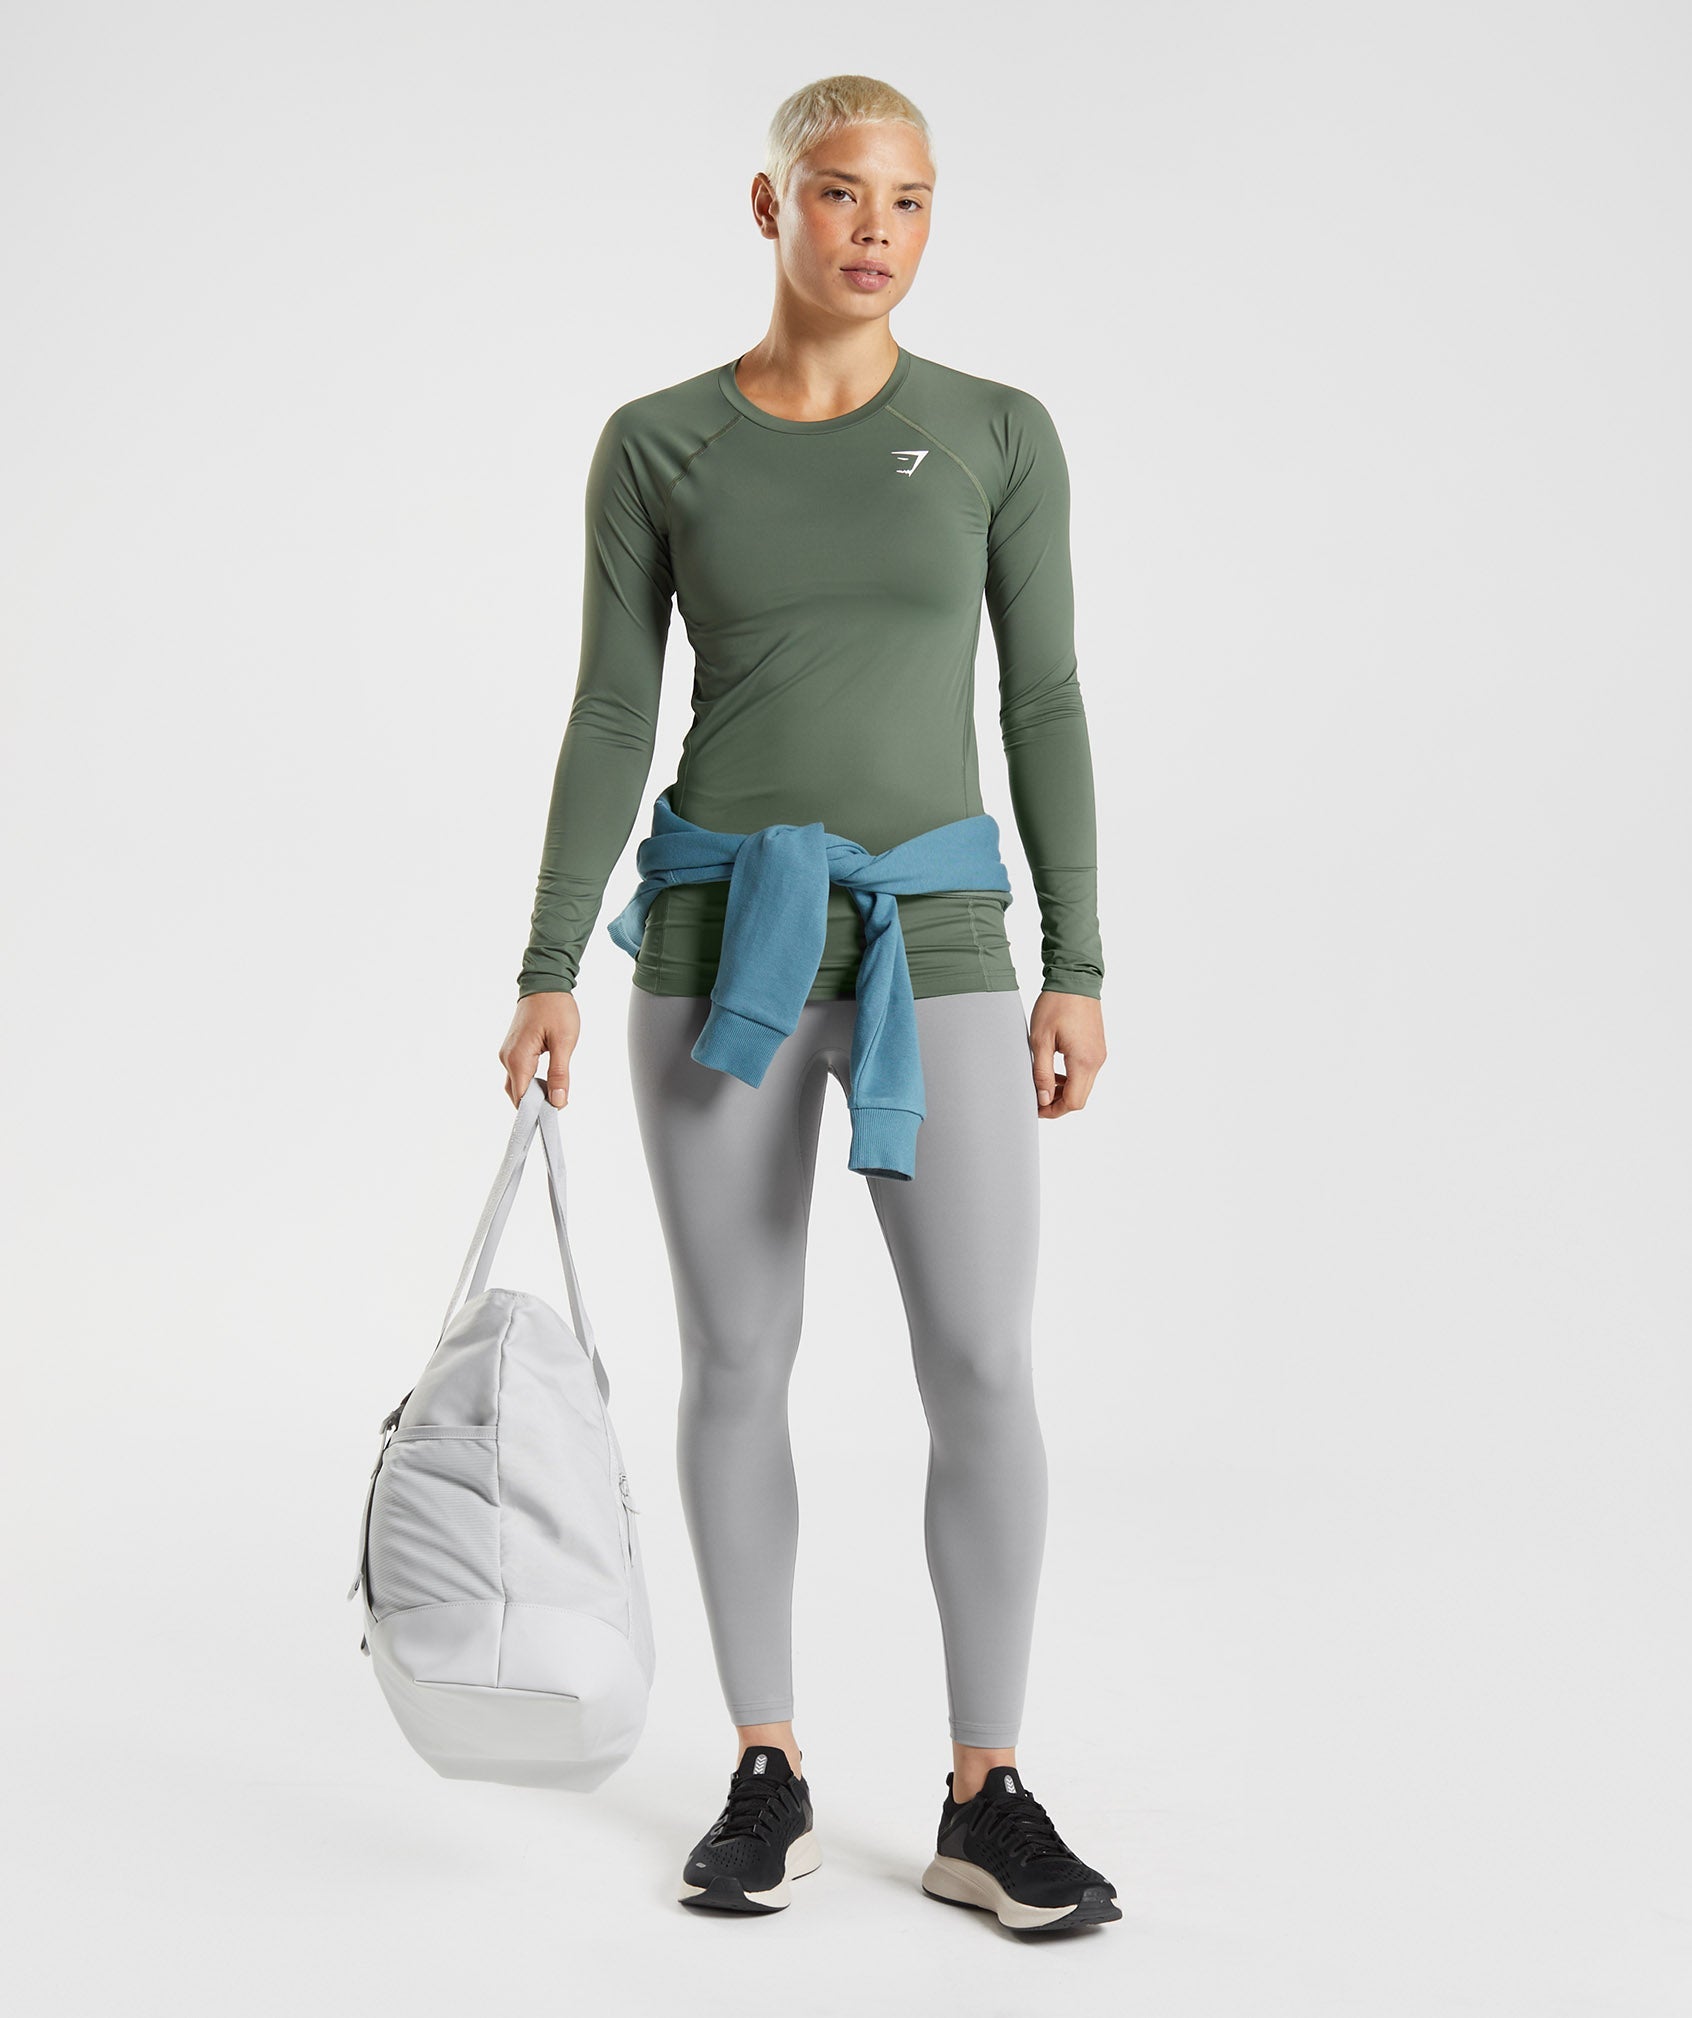 Training Baselayer Long Sleeve Top in Core Olive - view 4